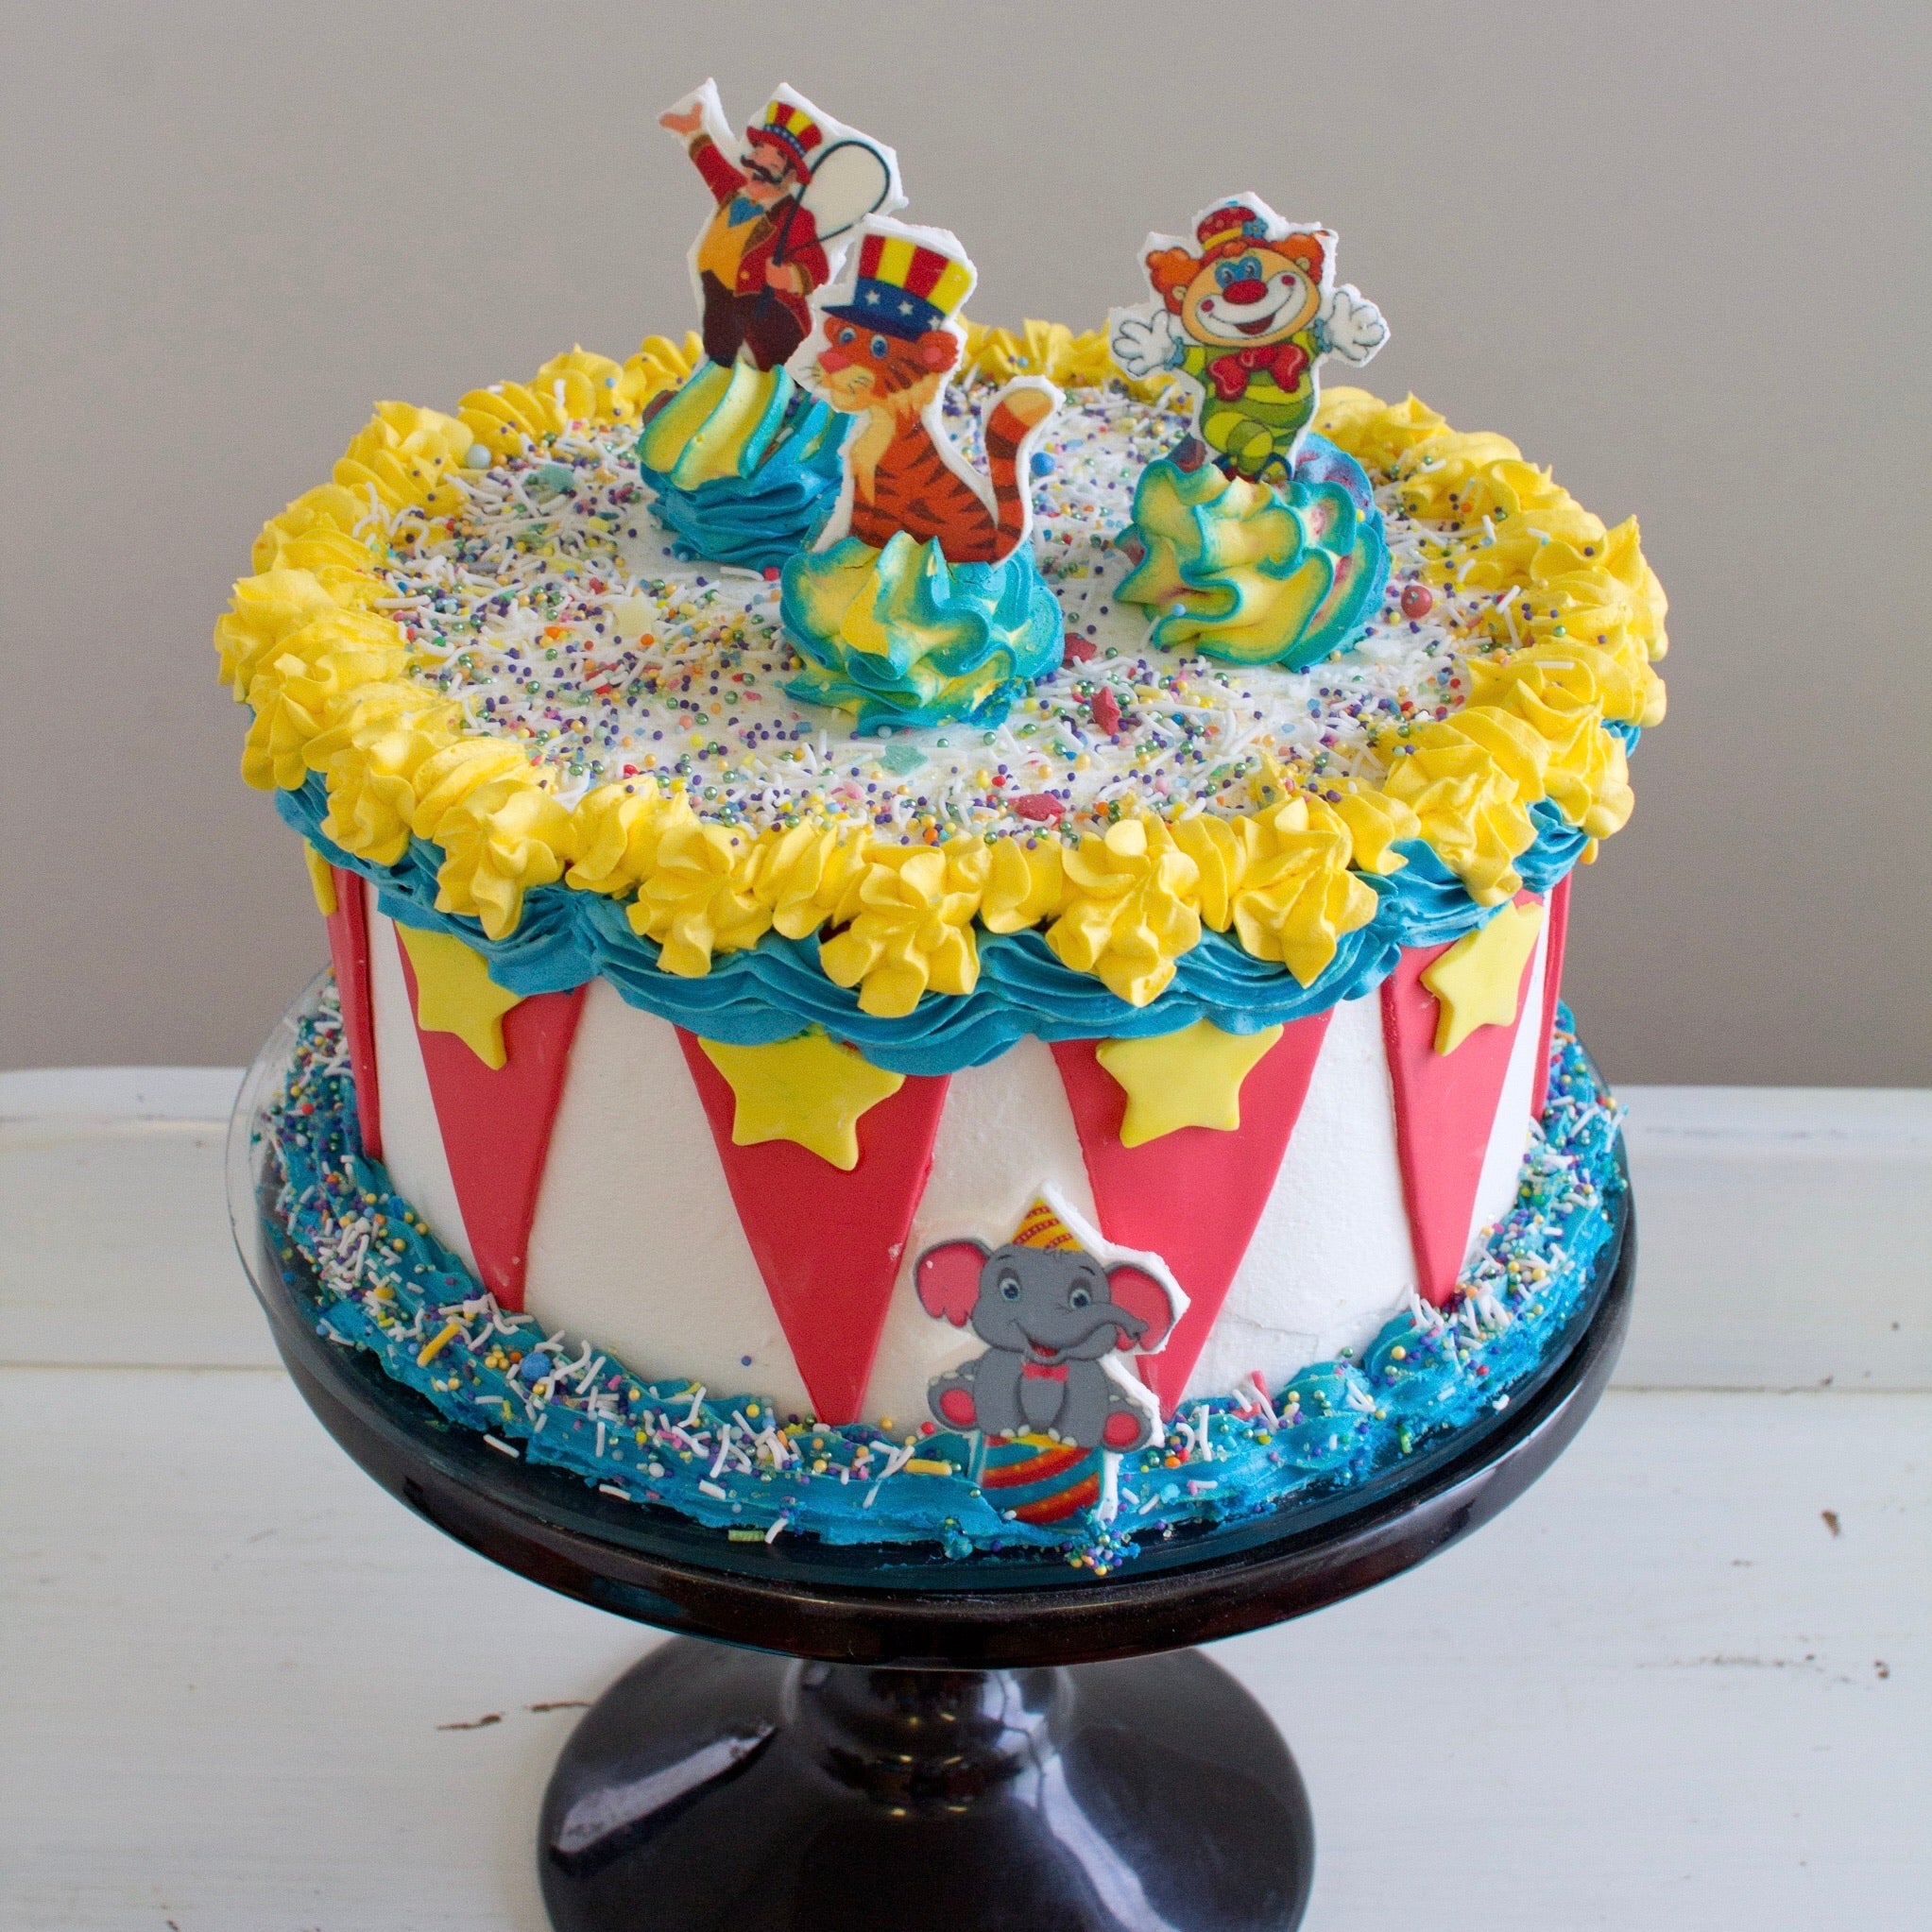 Circus Themed First Birthday Party - Pretty My Party